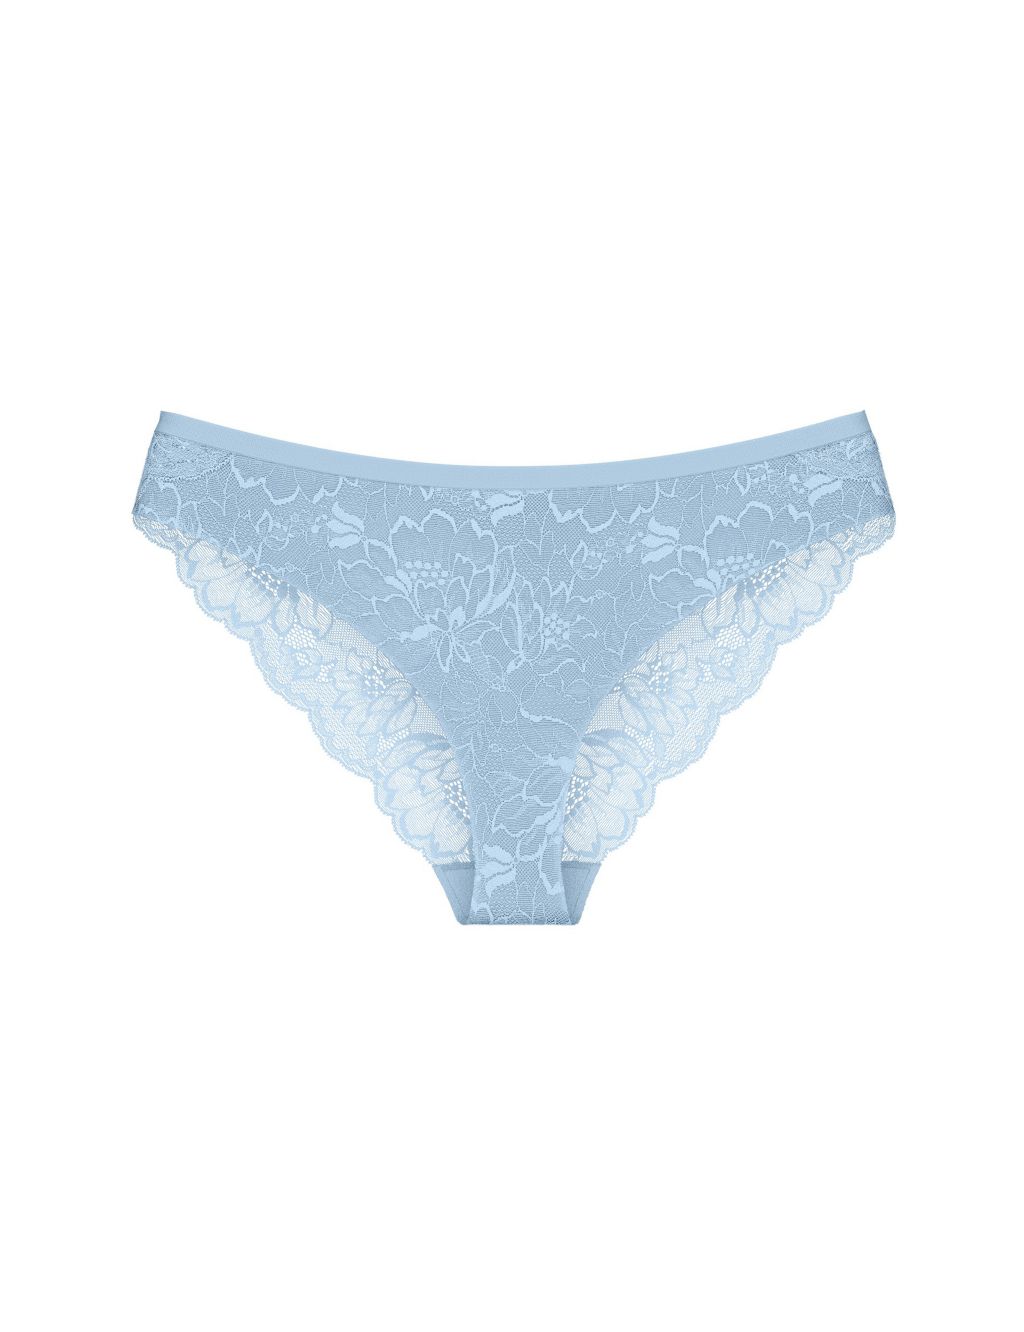 Amourette Charm All Over Lace Brazilian Knickers 1 of 5